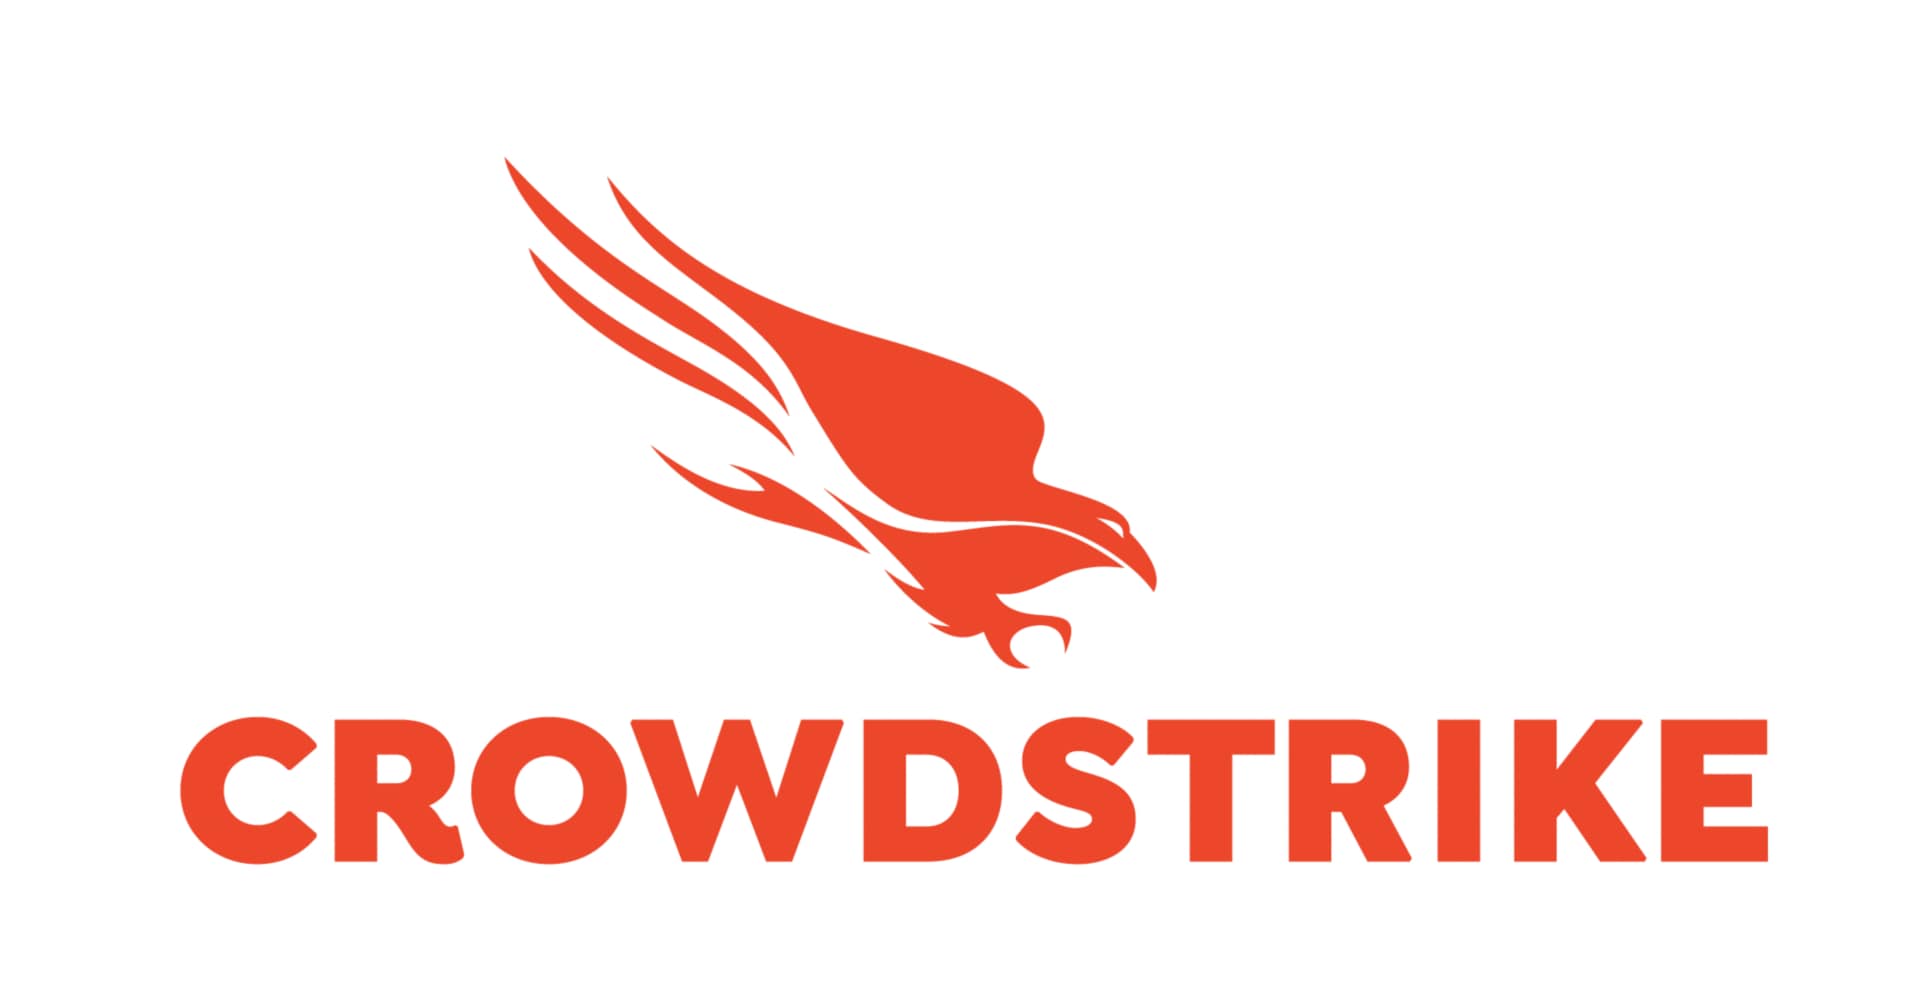 CrowdStrike 22-Month Falcon Insight (EDR) Application